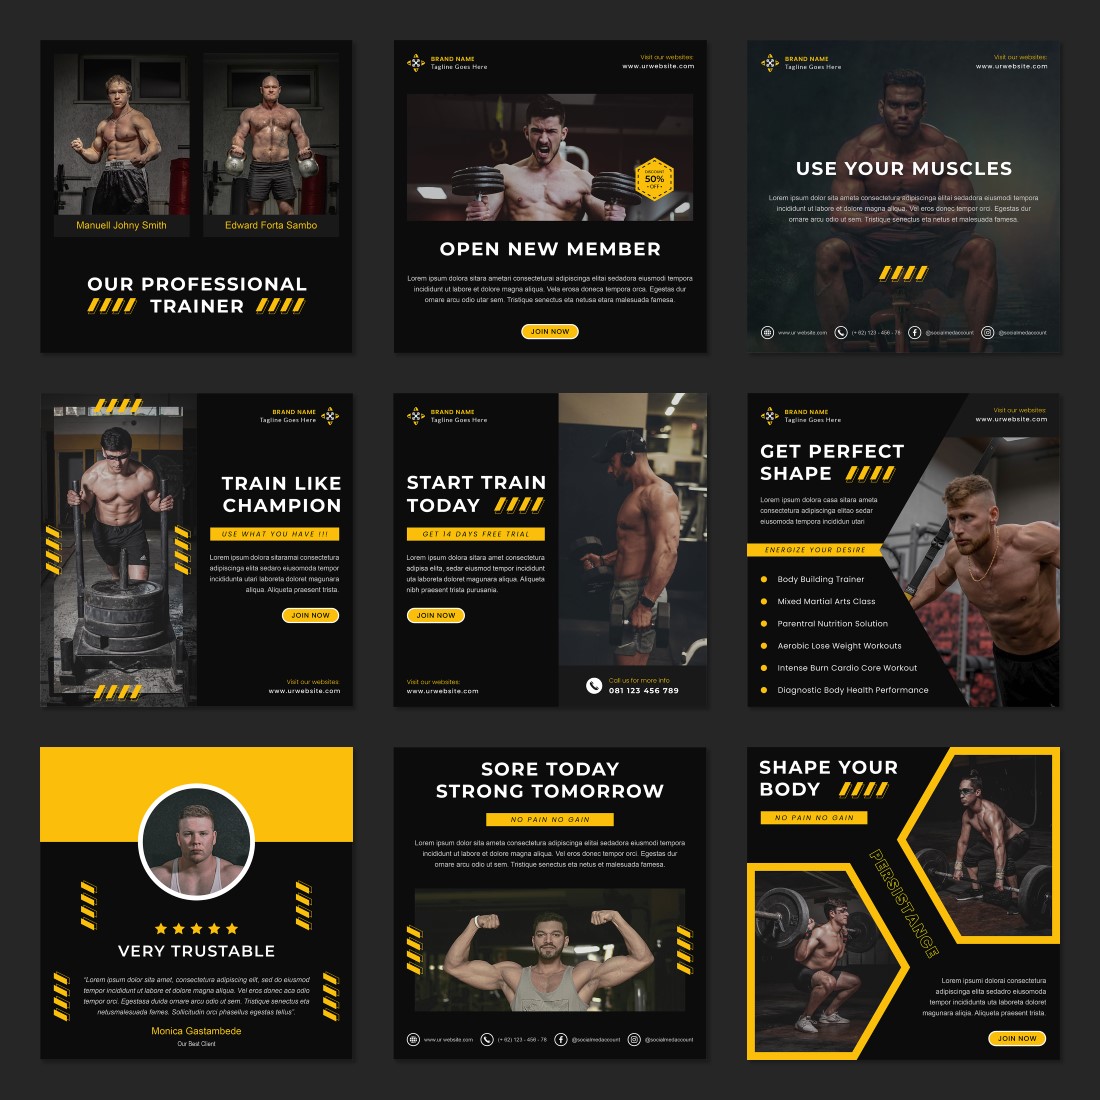 Fitness and Health Social Media Templates cover image.